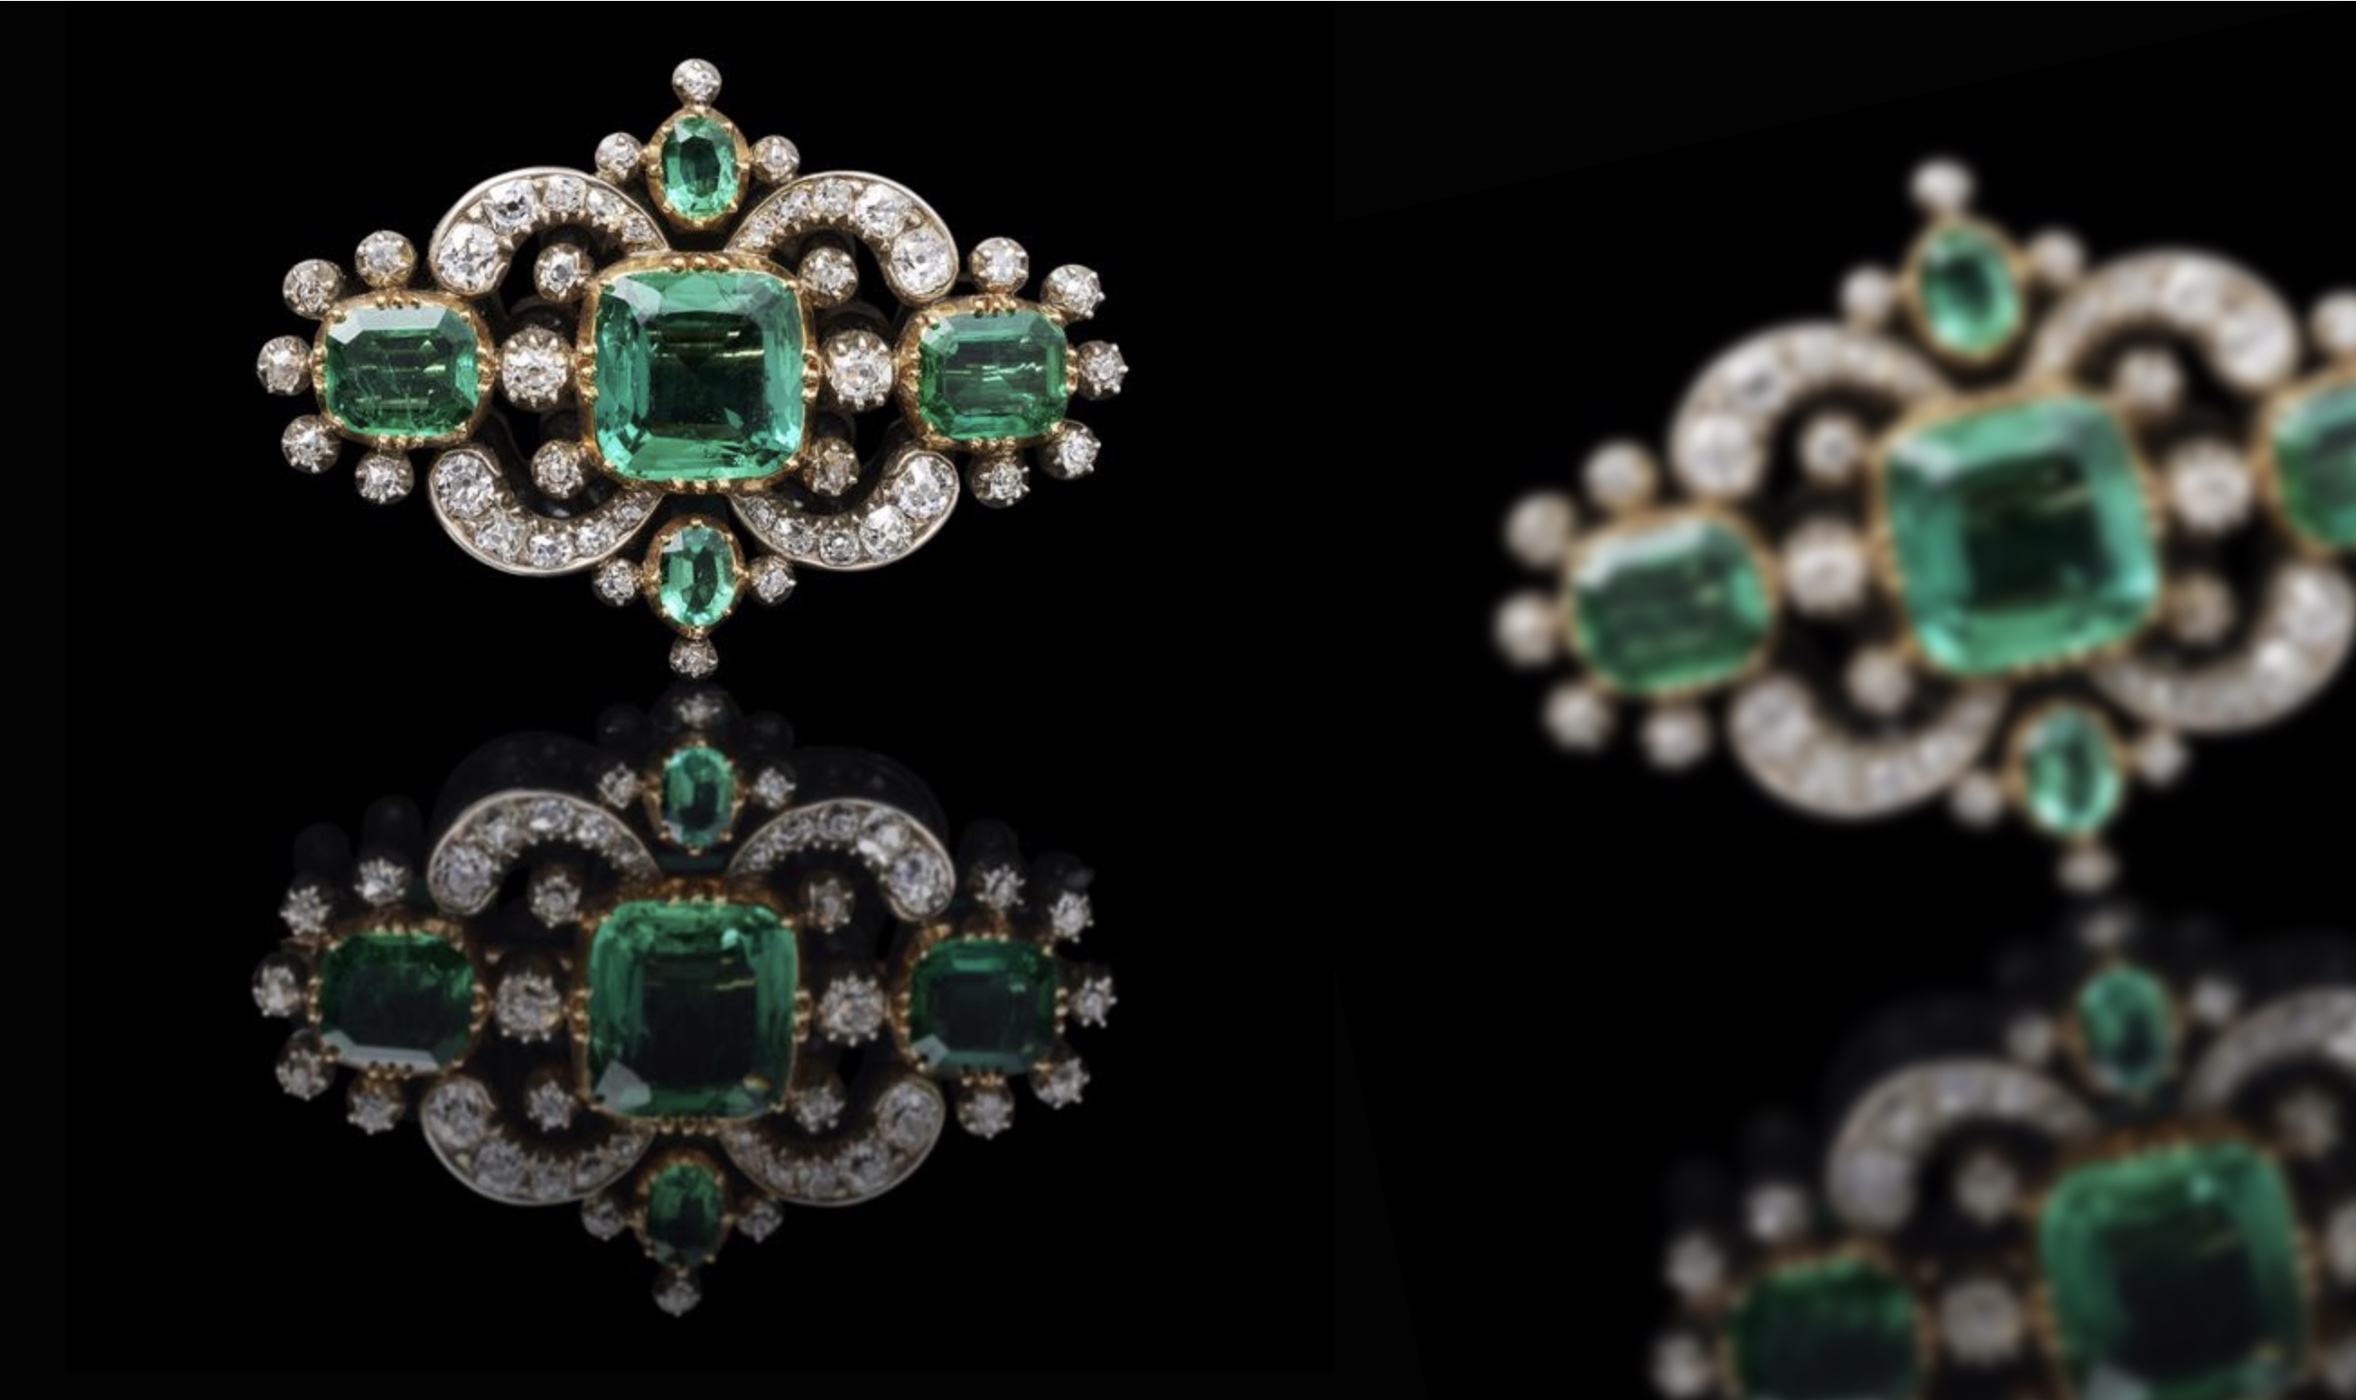 Royal Regency emerald and diamond brooch in sale – Antique Collecting